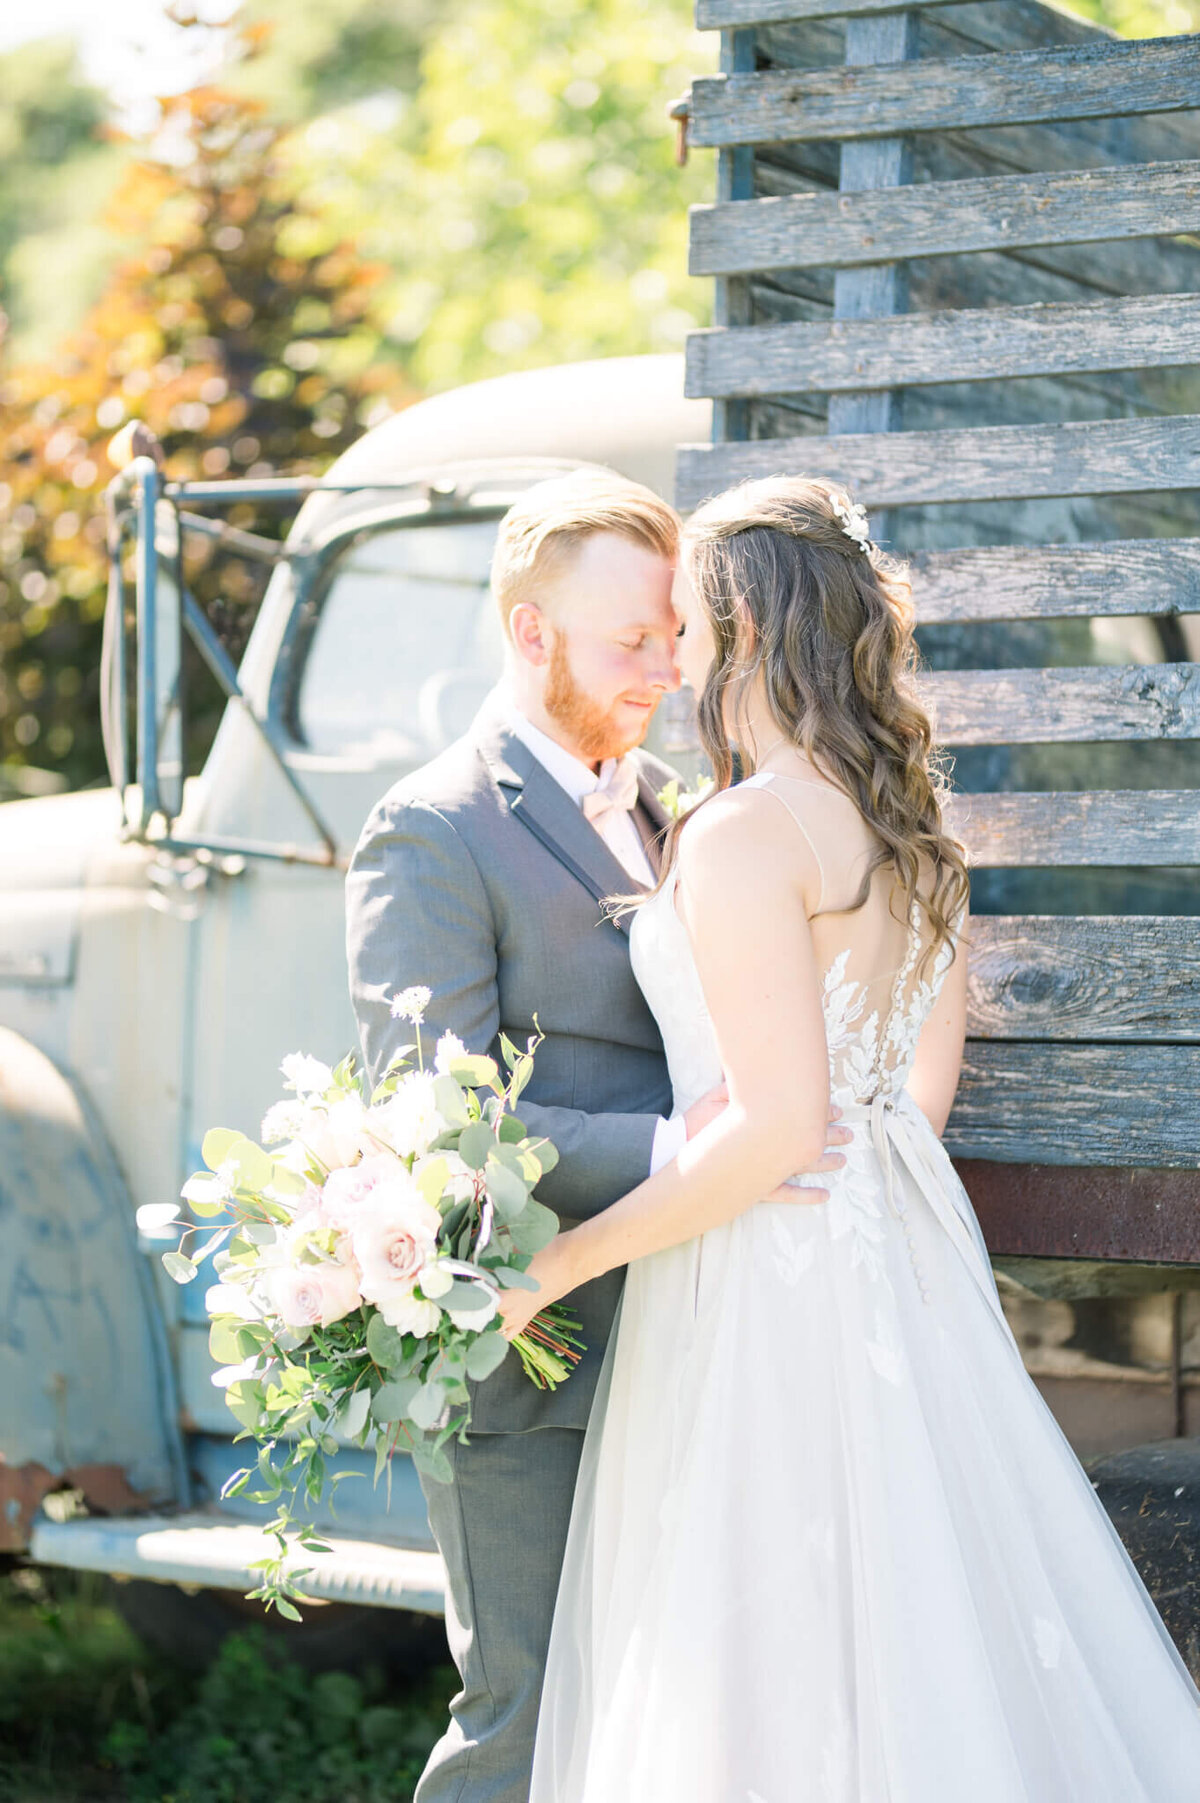 Bride and groom touching foreheads  in front of vintage truck